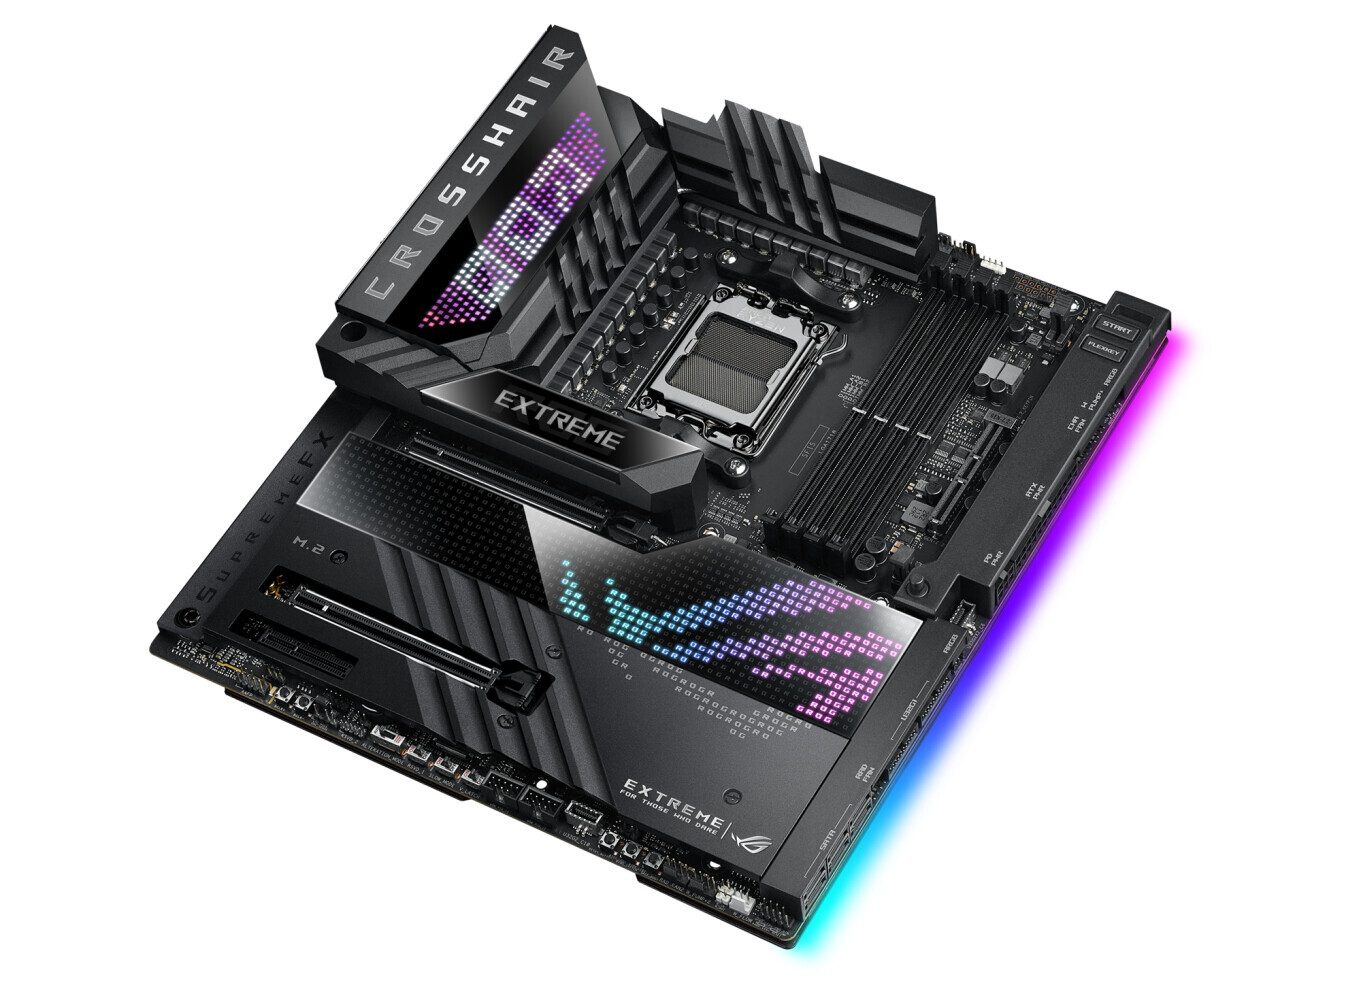 Micron Debuts Crucial P5 Plus PCIe For Gamers, Professionals